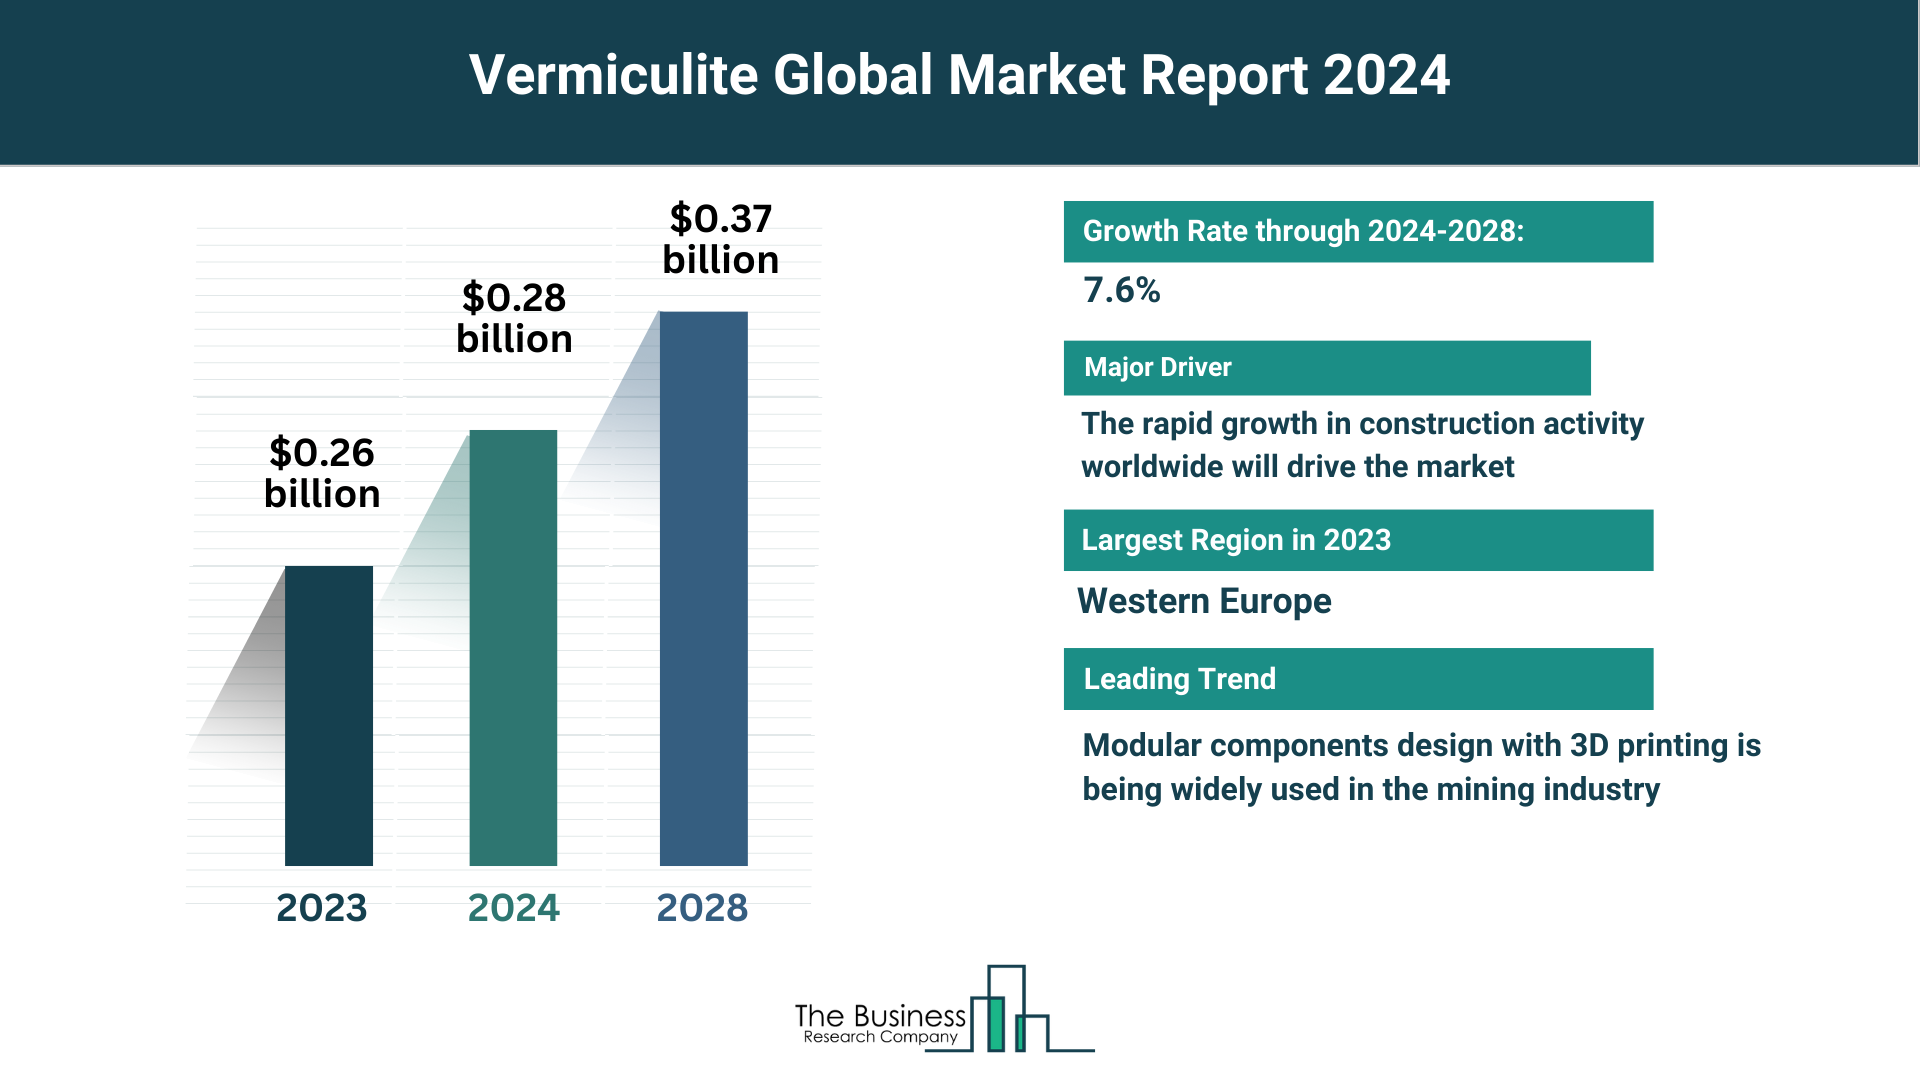 5 Major Insights Into The Vermiculite Market Report 2024